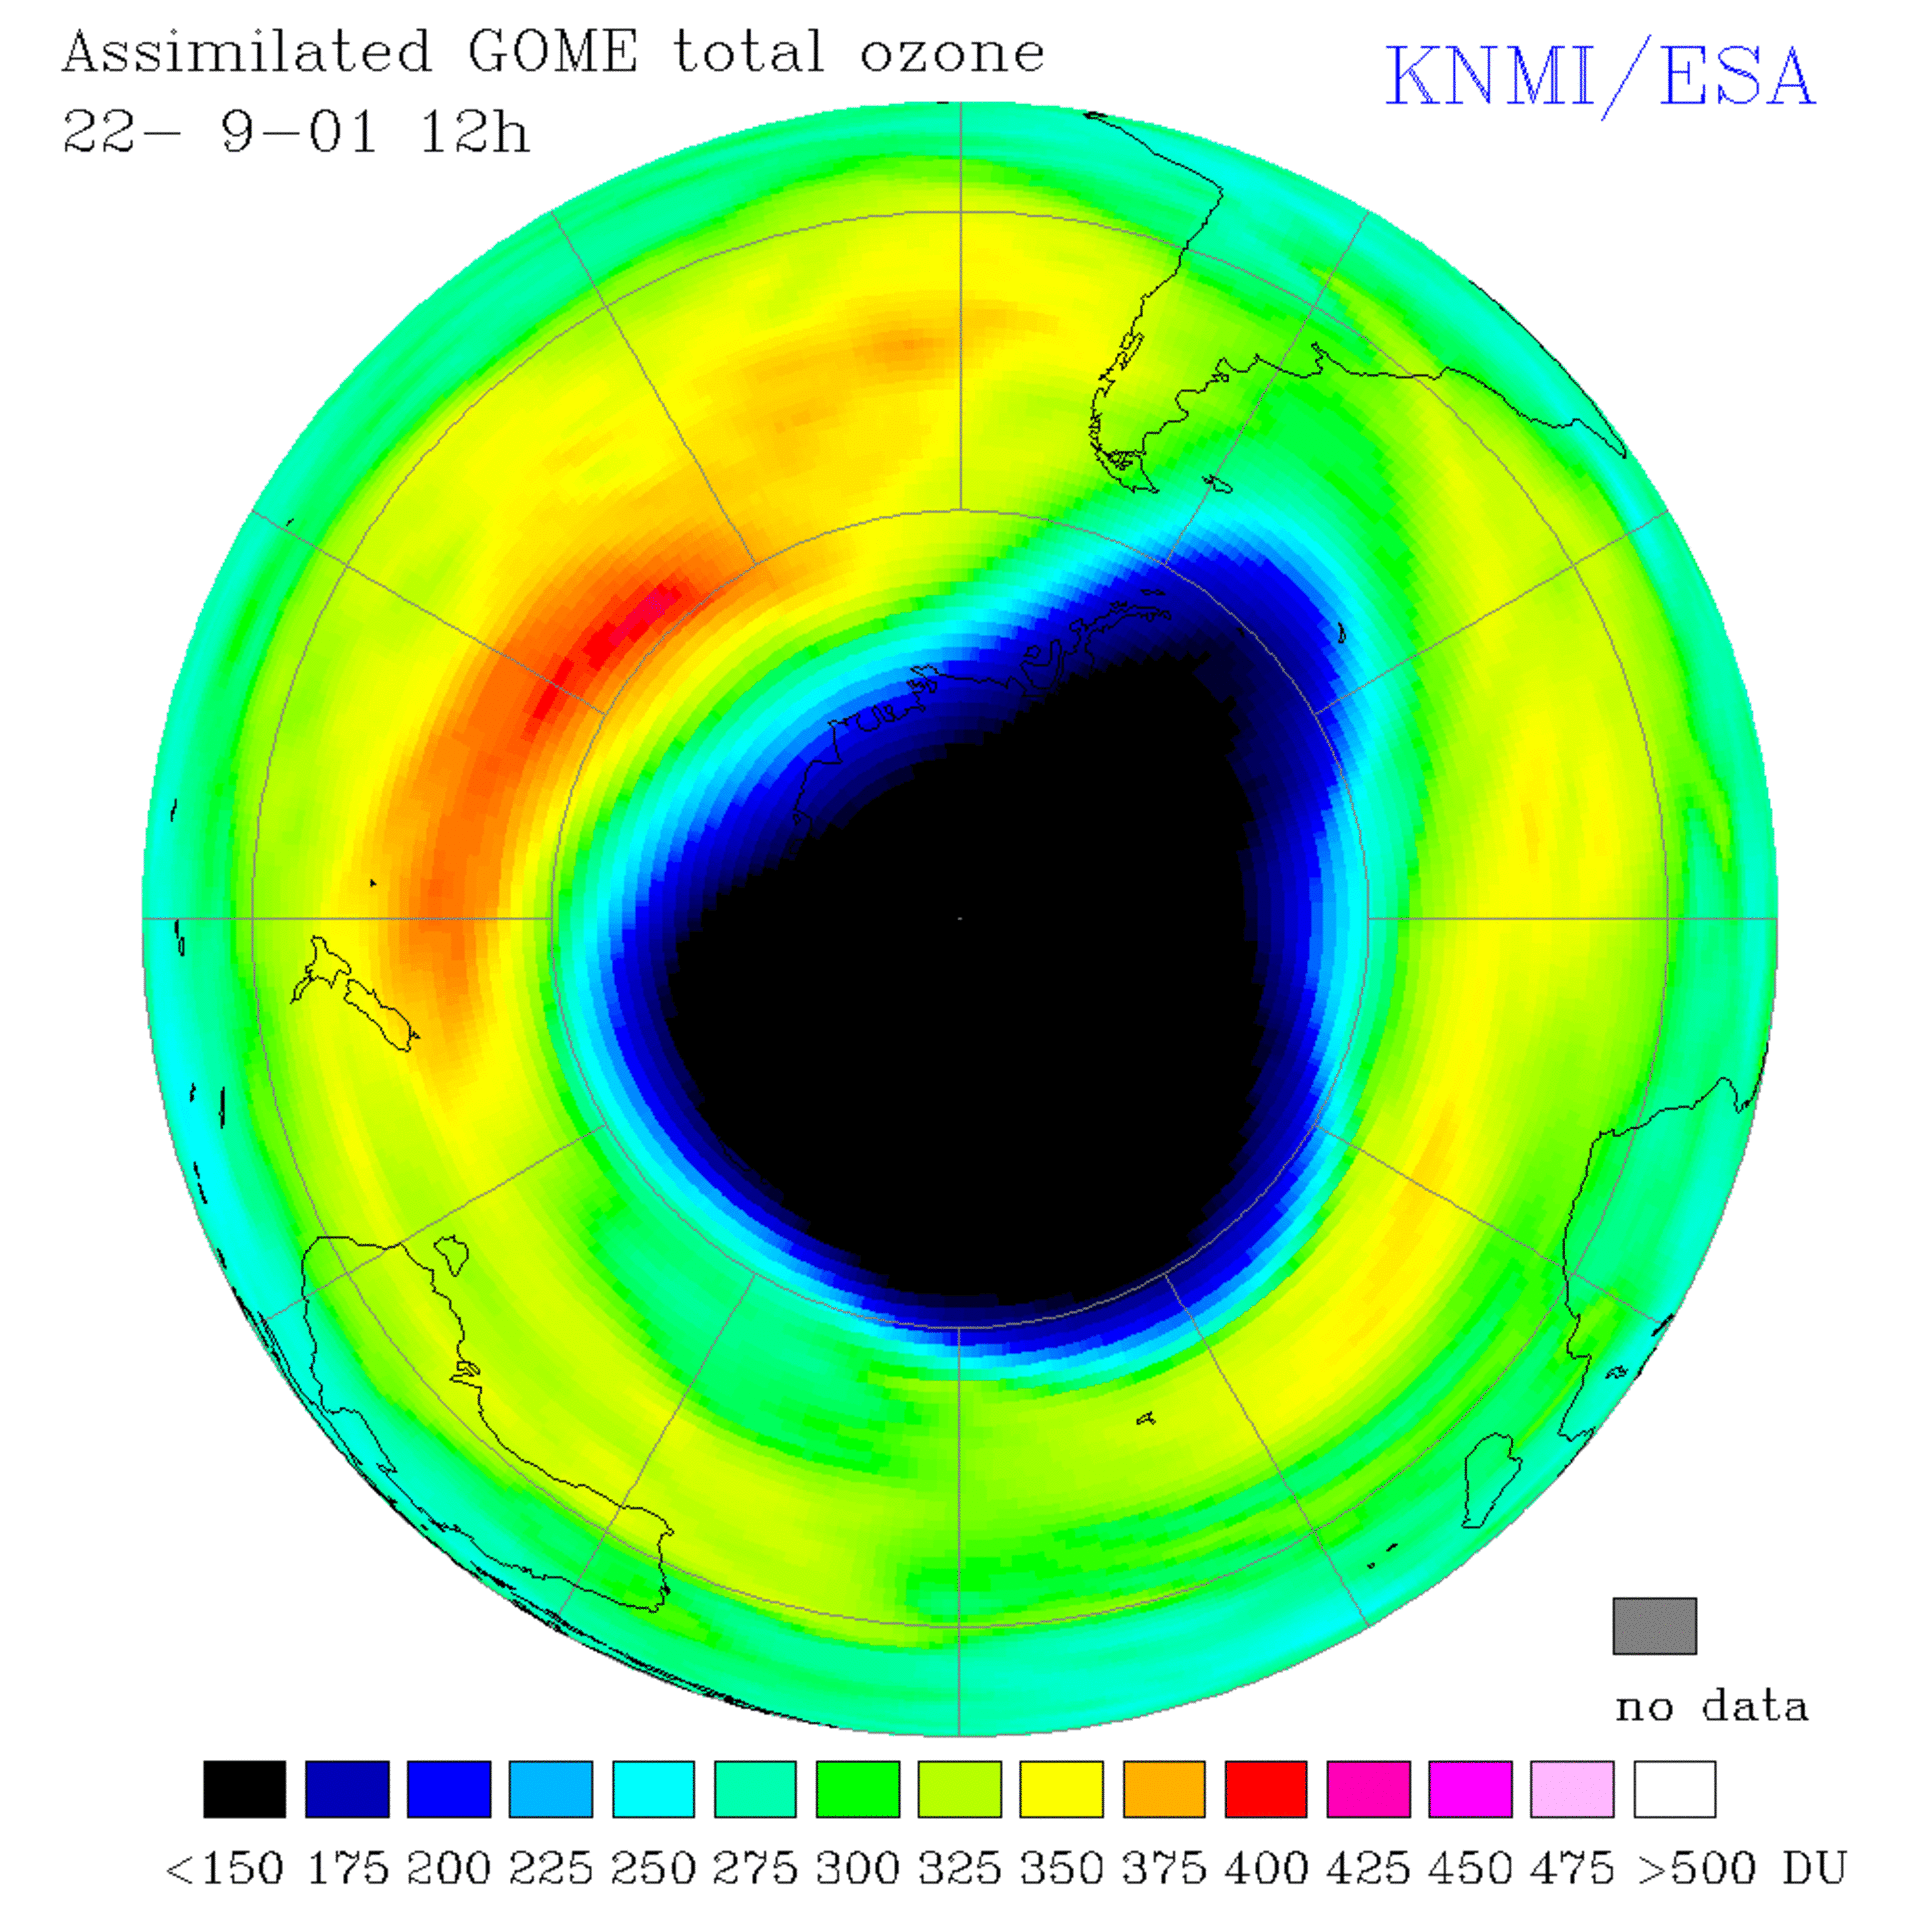 Predicted ozone hole for 22 September 2001